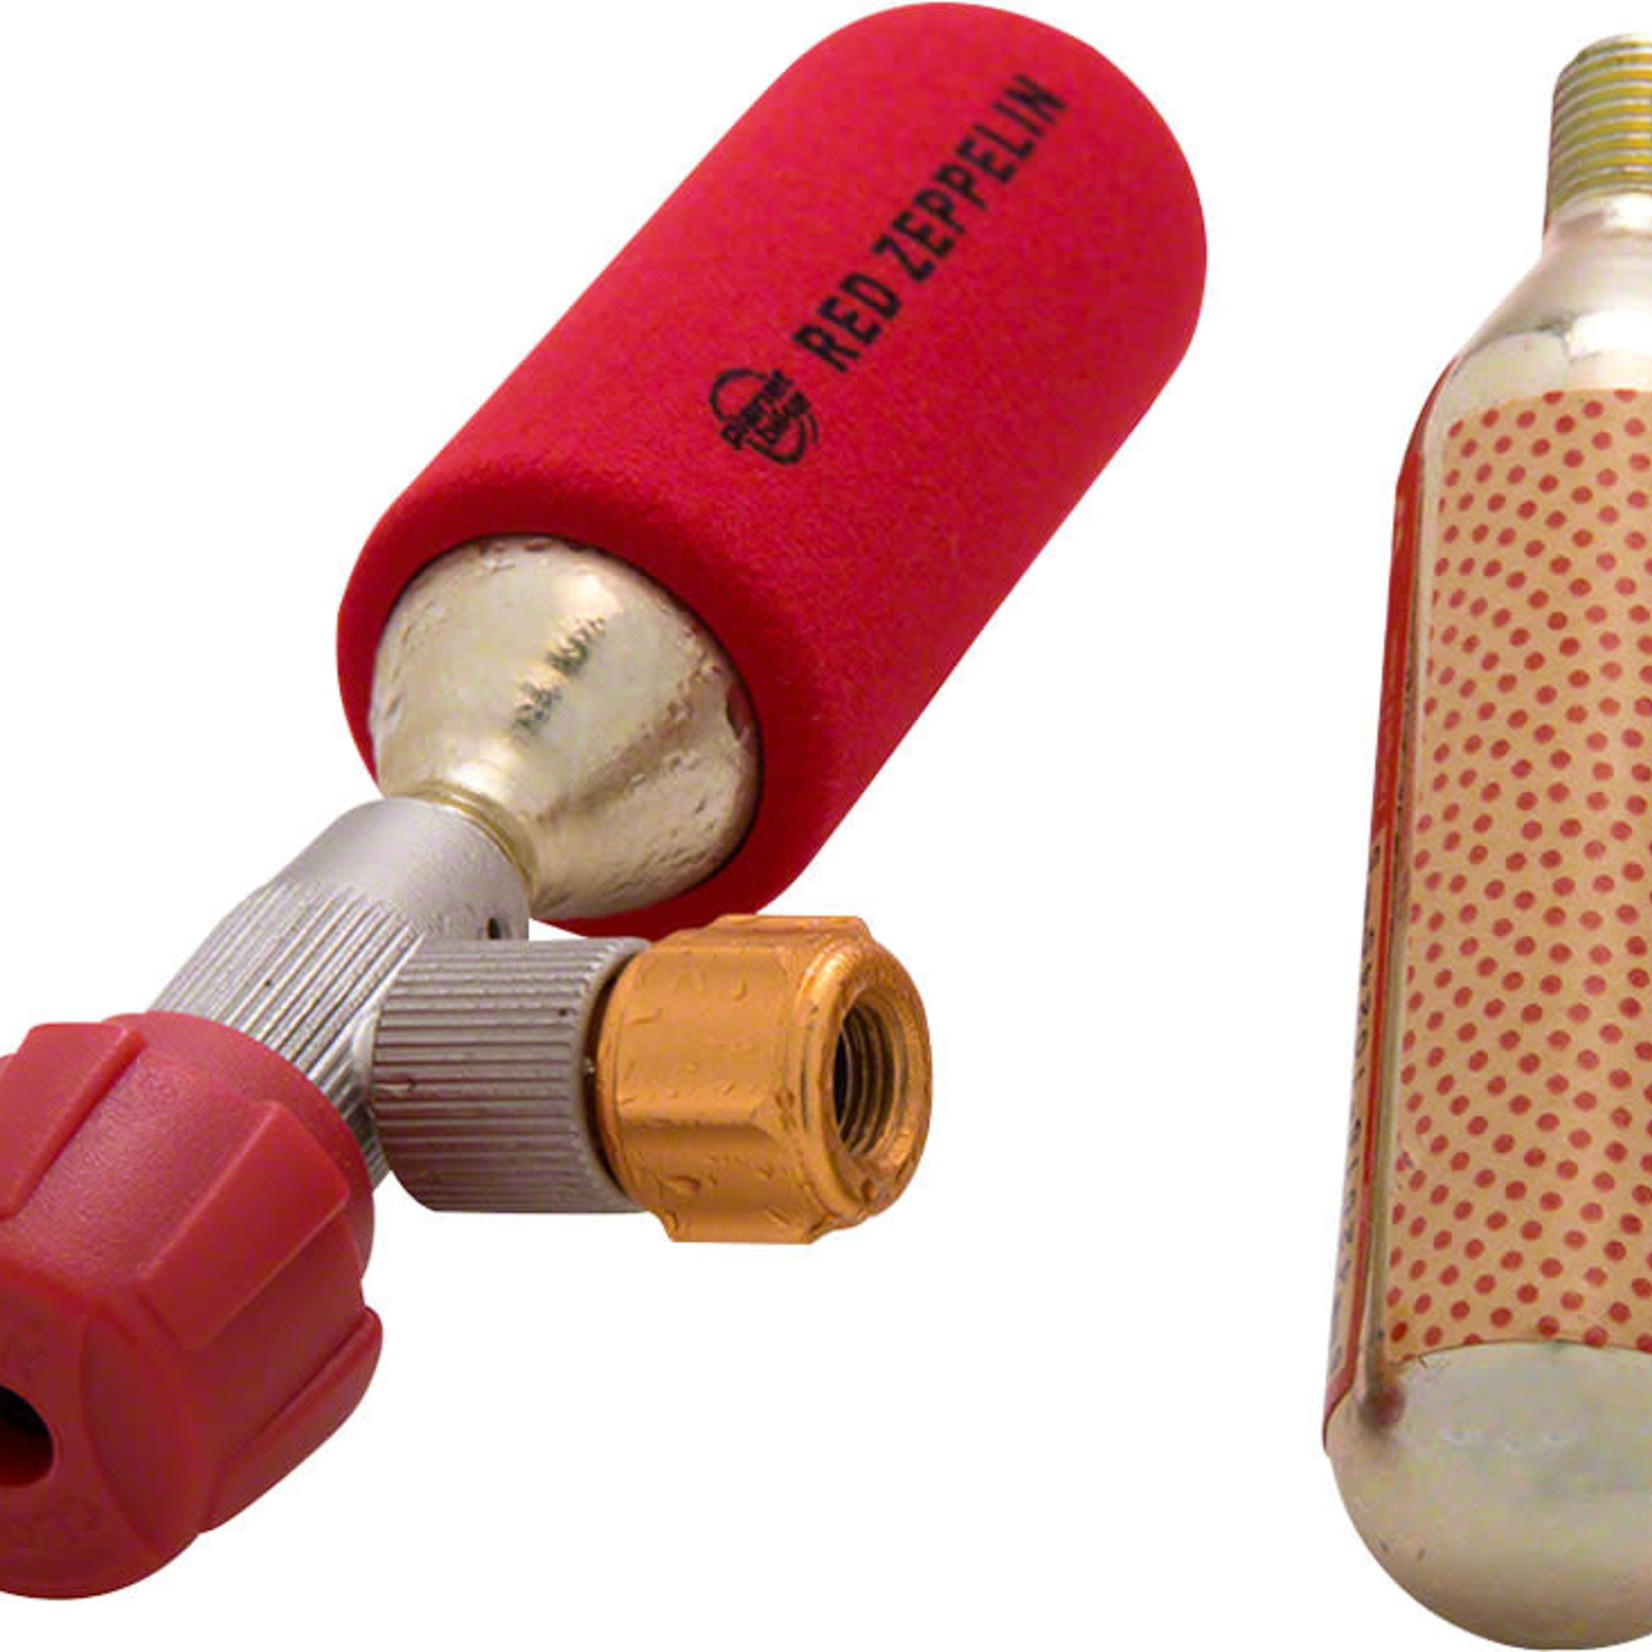 Planet Bike Planet Bike Red Zeppelin Inflator: Includes Two Threaded 16g Cartridges and Sleeve